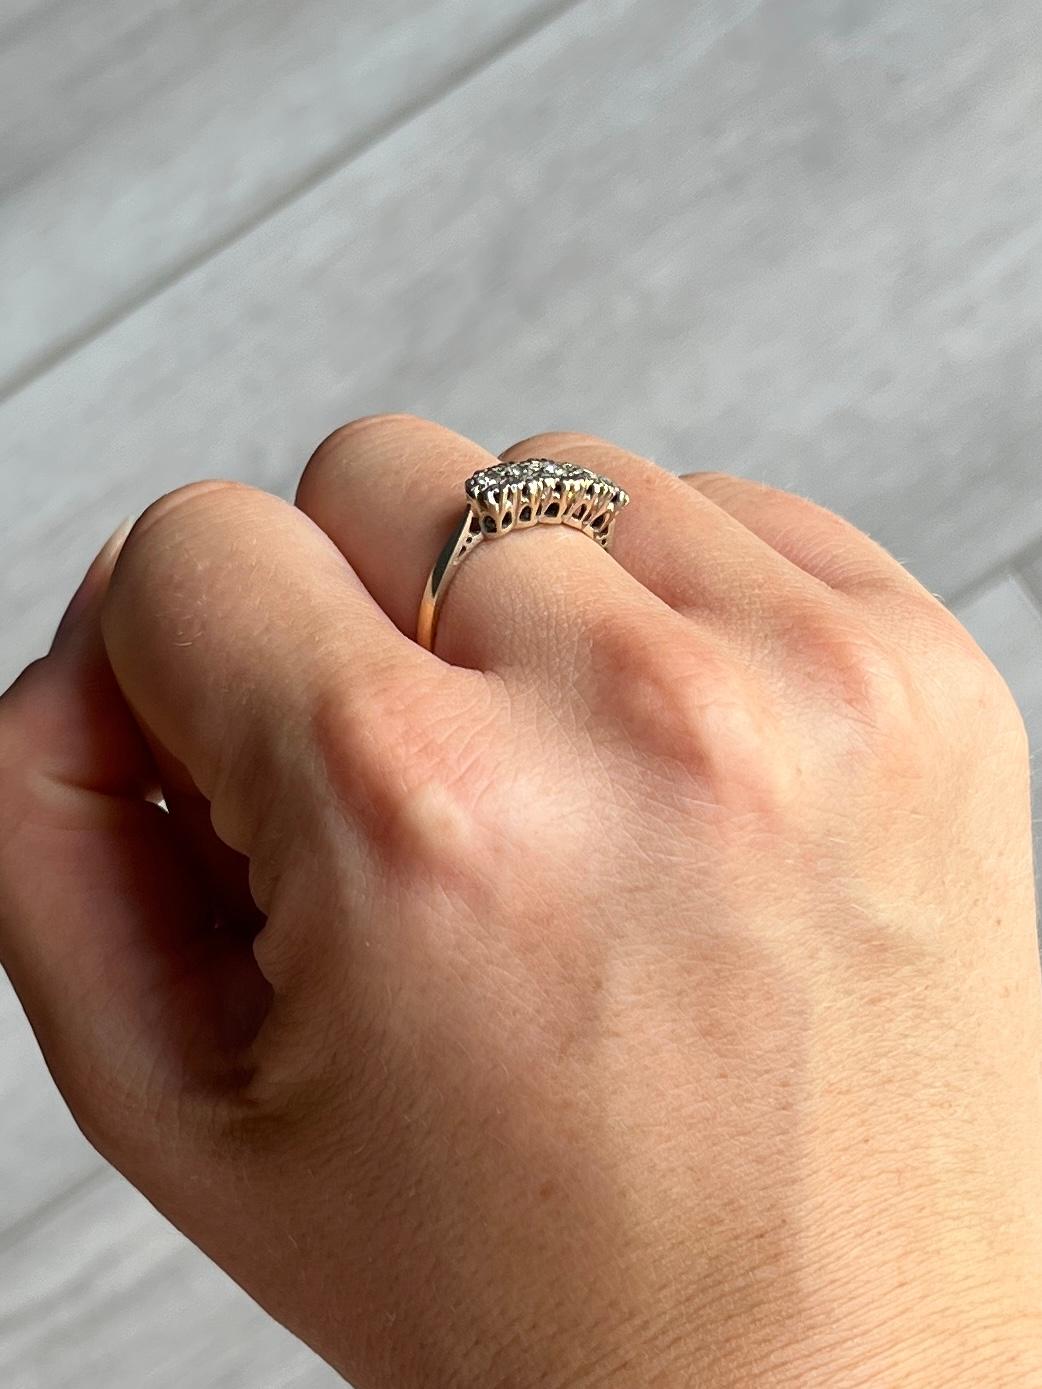 Five glistening diamonds sit fabulously in platinum illusions settings and  modelled in 18ct gold. The diamond total is 31pts. 

Ring Size: O or 7 1/4 
Height Off Finger: 5

Weight: 2.9g